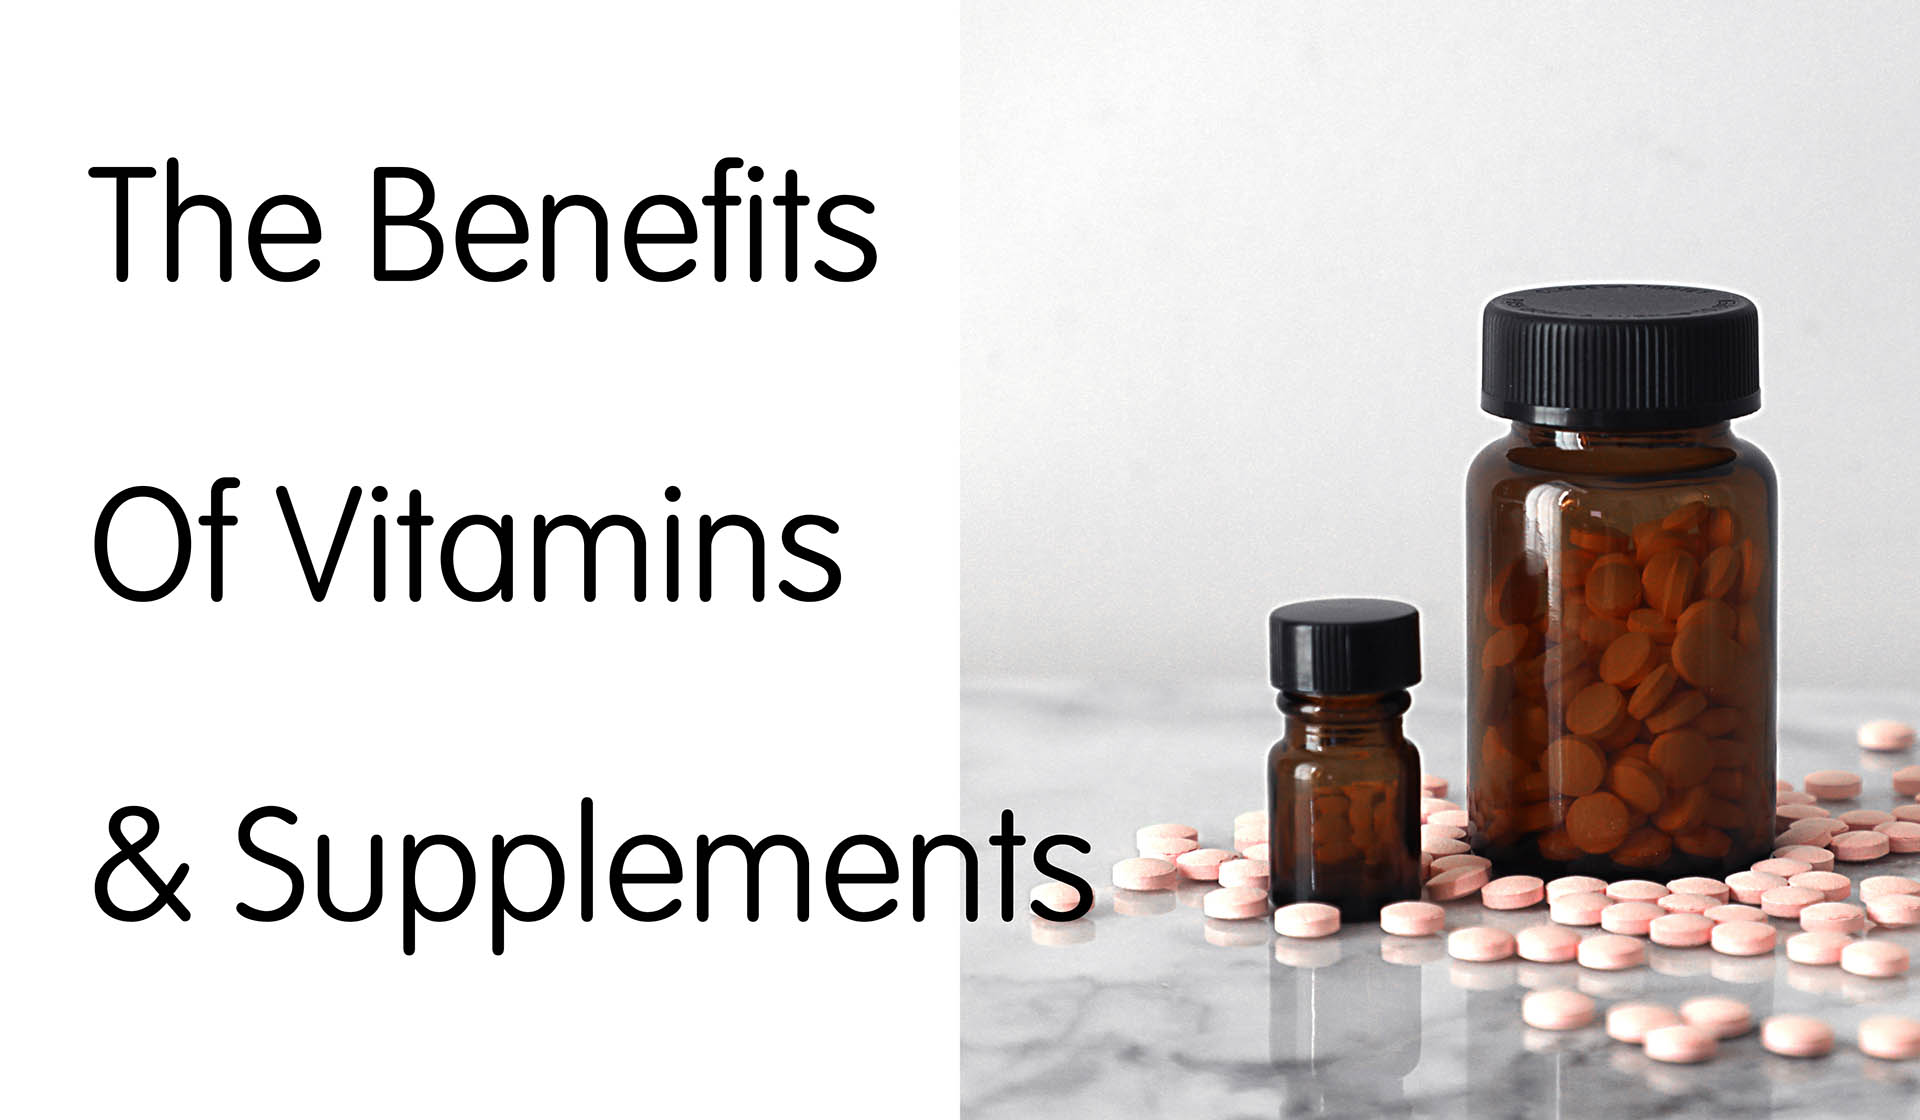 The Benefits of Vitamins and Supplements